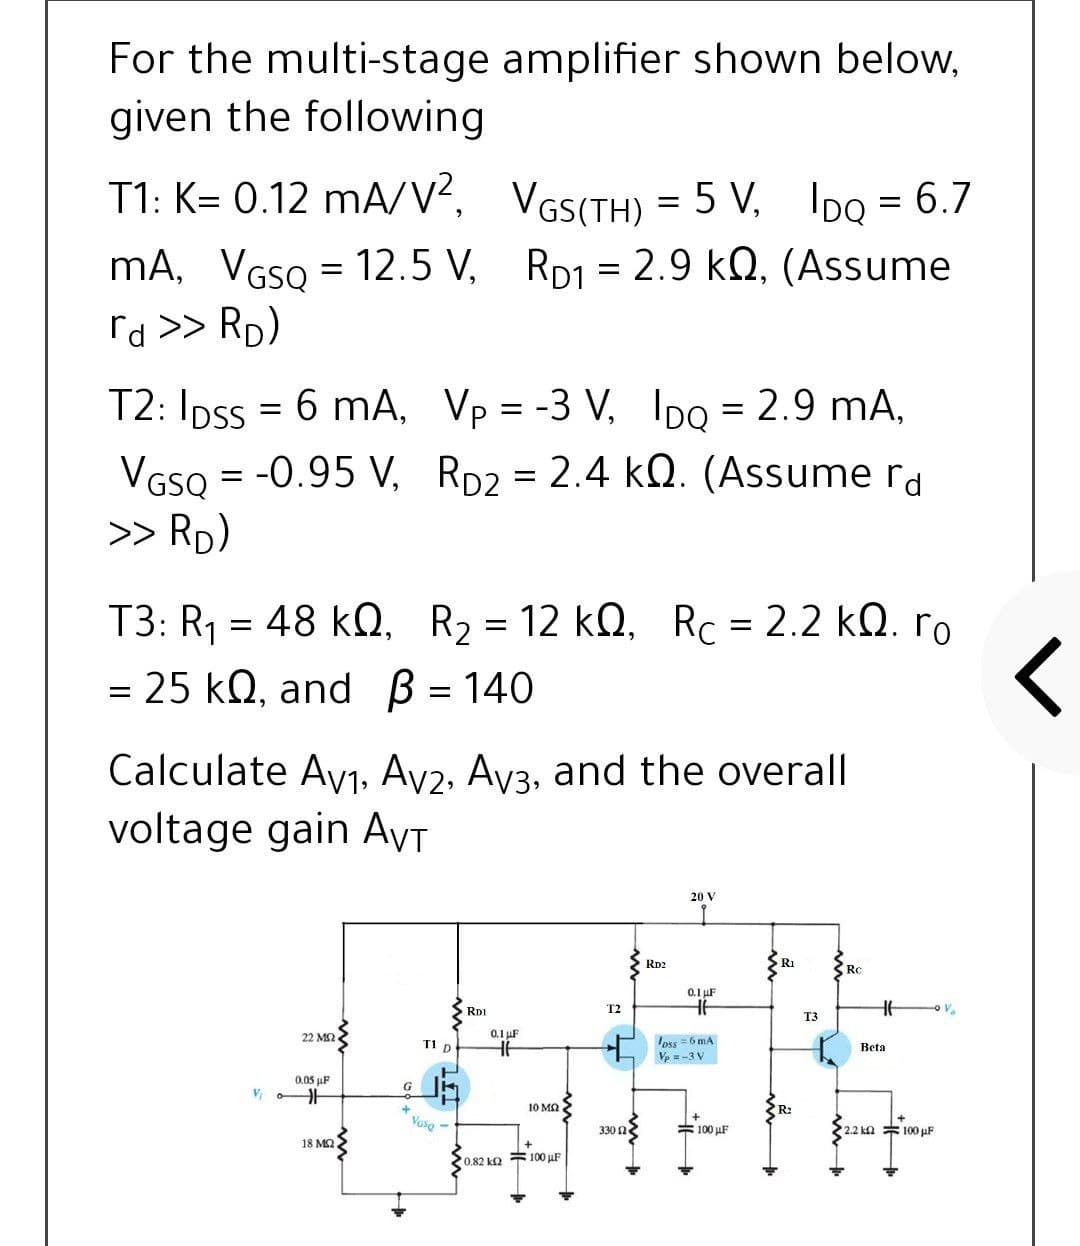 For the multi-stage amplifier shown below,
given the following
T1: K= 0.12 mA/V?, VGS(TH) = 5 V, IDo = 6.7
mA, VGSO = 12.5 V, RD1 = 2.9 kQ, (Assume
%3D
rd >> Rp)
T2: Ipss = 6 mA, Vp = -3 V, Ipo = 2.9 mA,
VGSQ = -0.95 V, Rp2 = 2.4 kQ. (Assume rd
>> RD)
%3D
T3: R1 = 48 kQ, R2 = 12 kQ, Rc = 2.2 kQ. ro
= 25 kQ, and B = 140
Calculate Ay1, Av2, Av3, and the overall
voltage gain AVT
20 V
RD2
R1
RC
0.1 uF
RD1
T2
T3
22 M2
0.1 uF
oss =6 mA
Ve = -3 V
T1 D
Beta
0.05 µF
10 MQ
R2
Vase
330 n
= 100 uF
2.2 ka 100 µF
18 MQ
0.82 k2
= 100 µF
in
